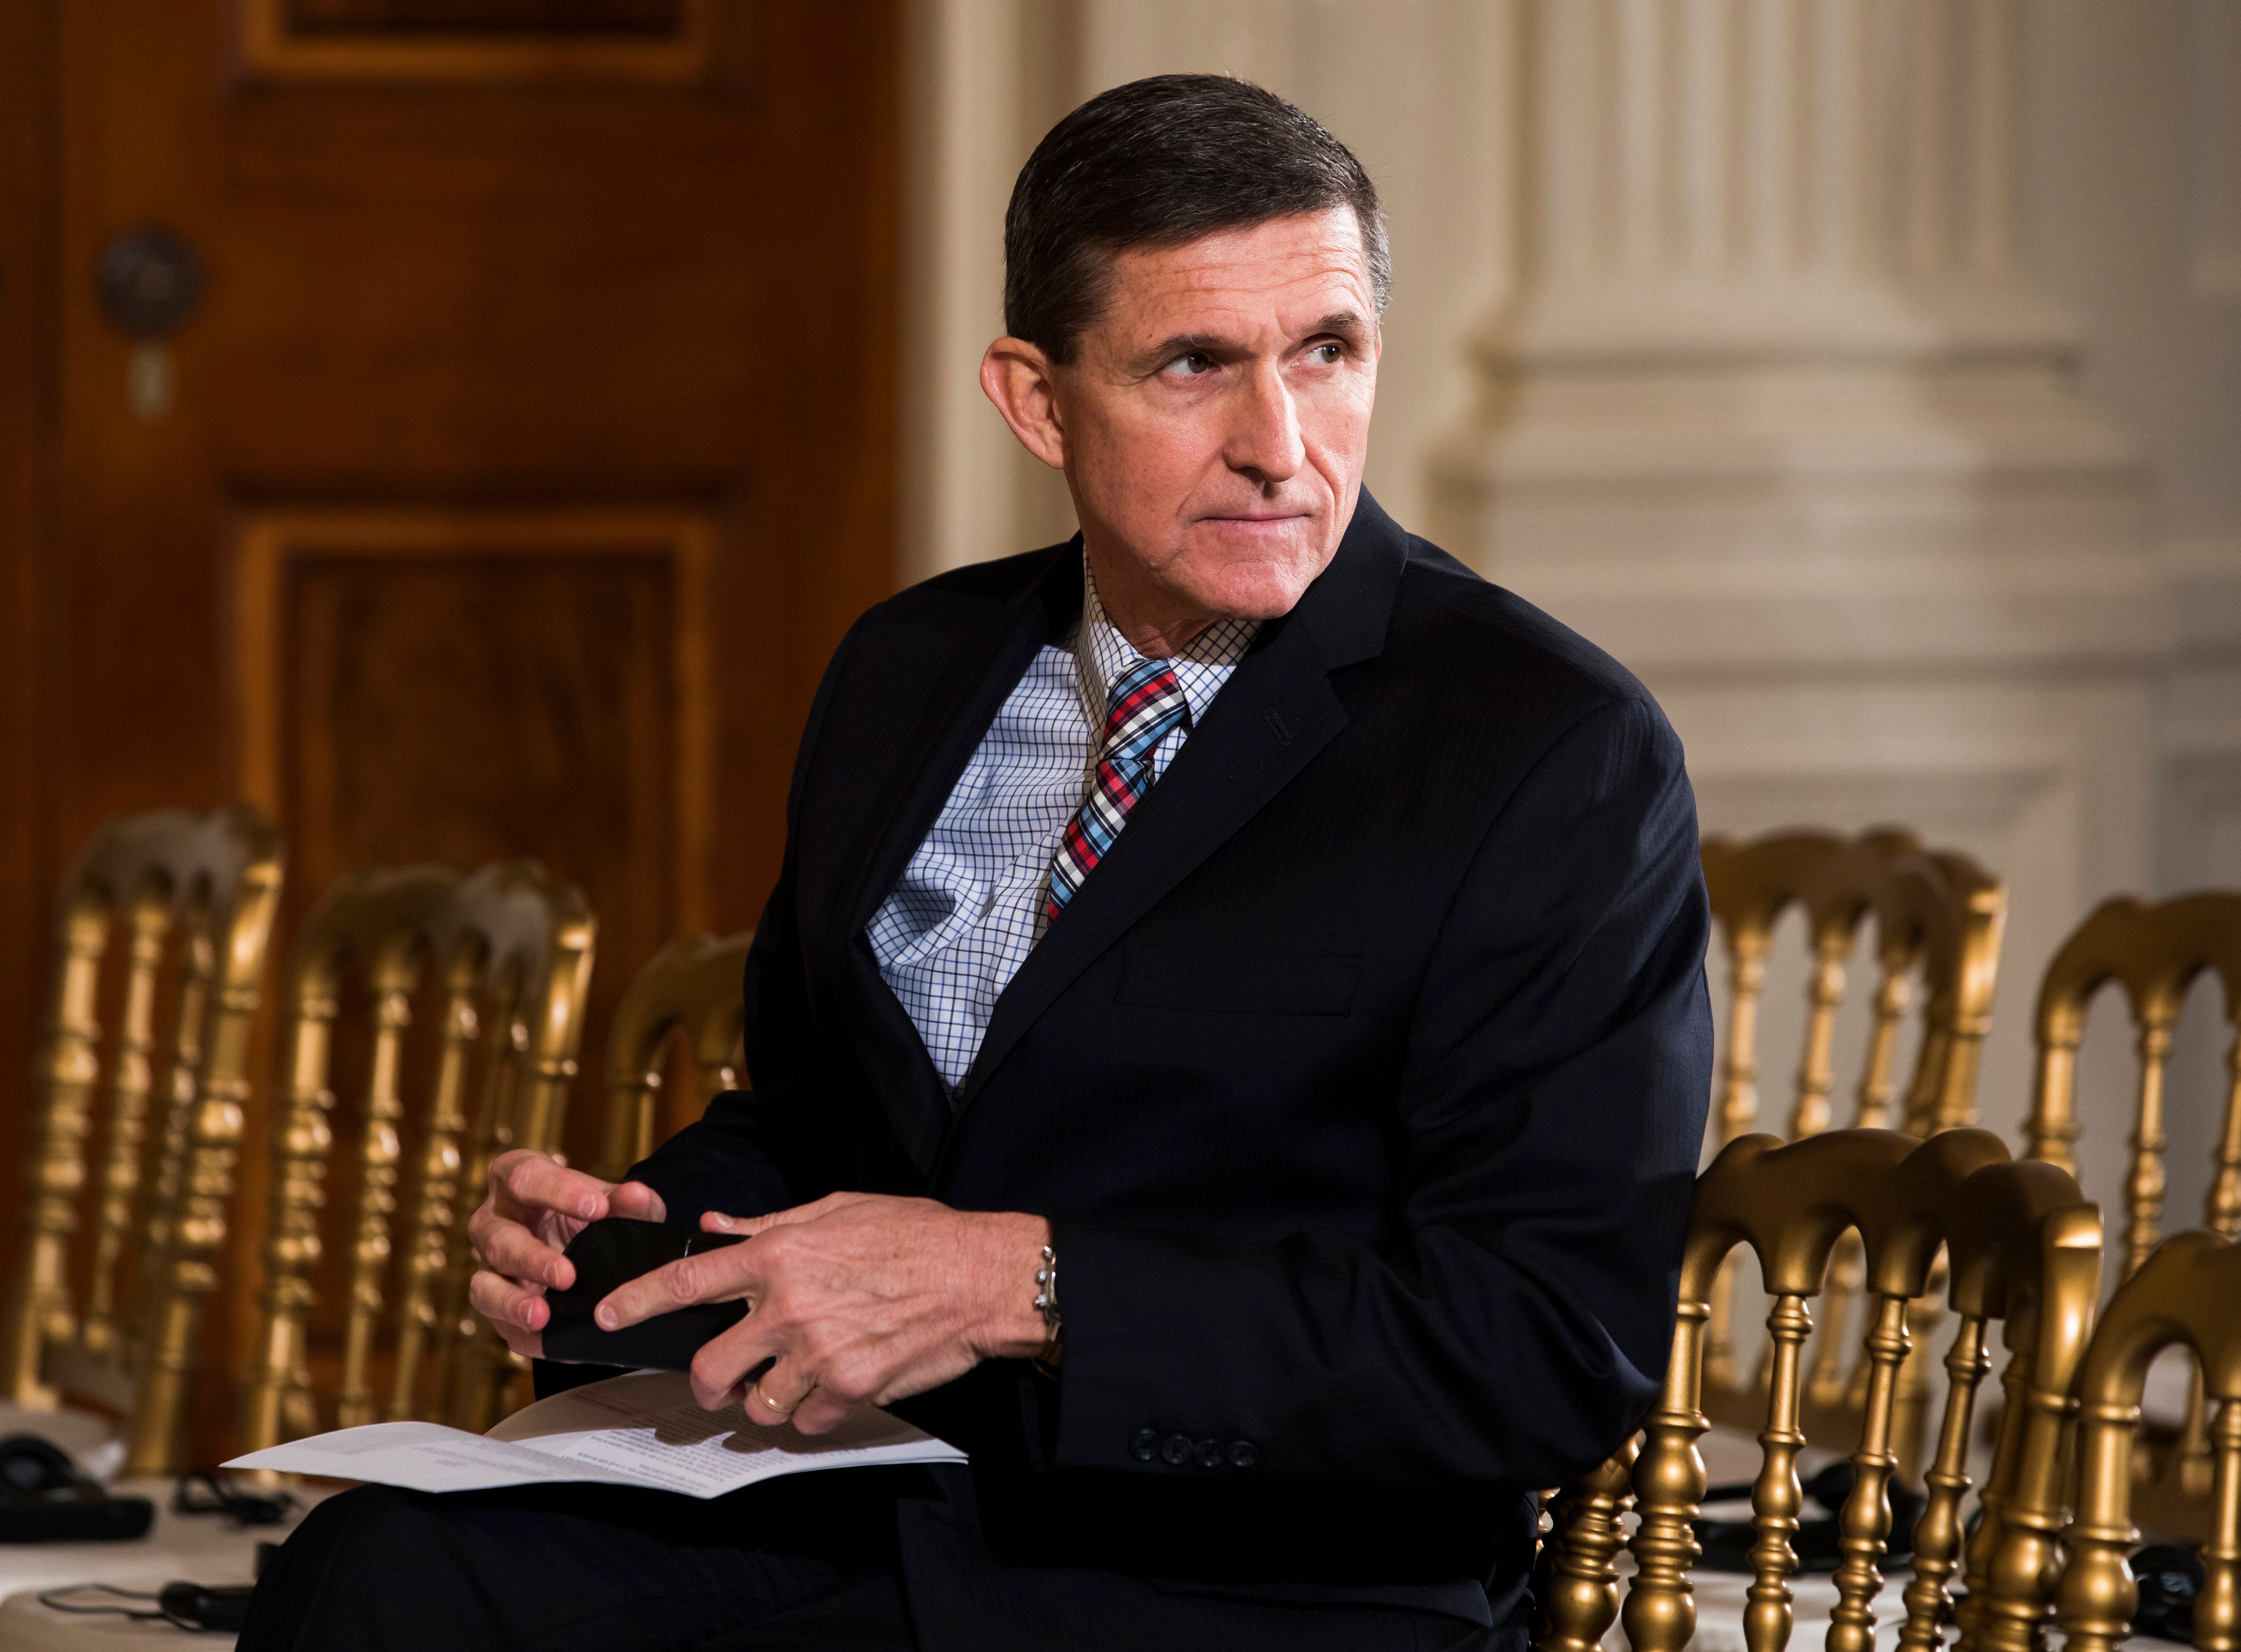 Michael Flynn, who pleaded guilty to lying to FBI, to stump for Montana GOP candidate